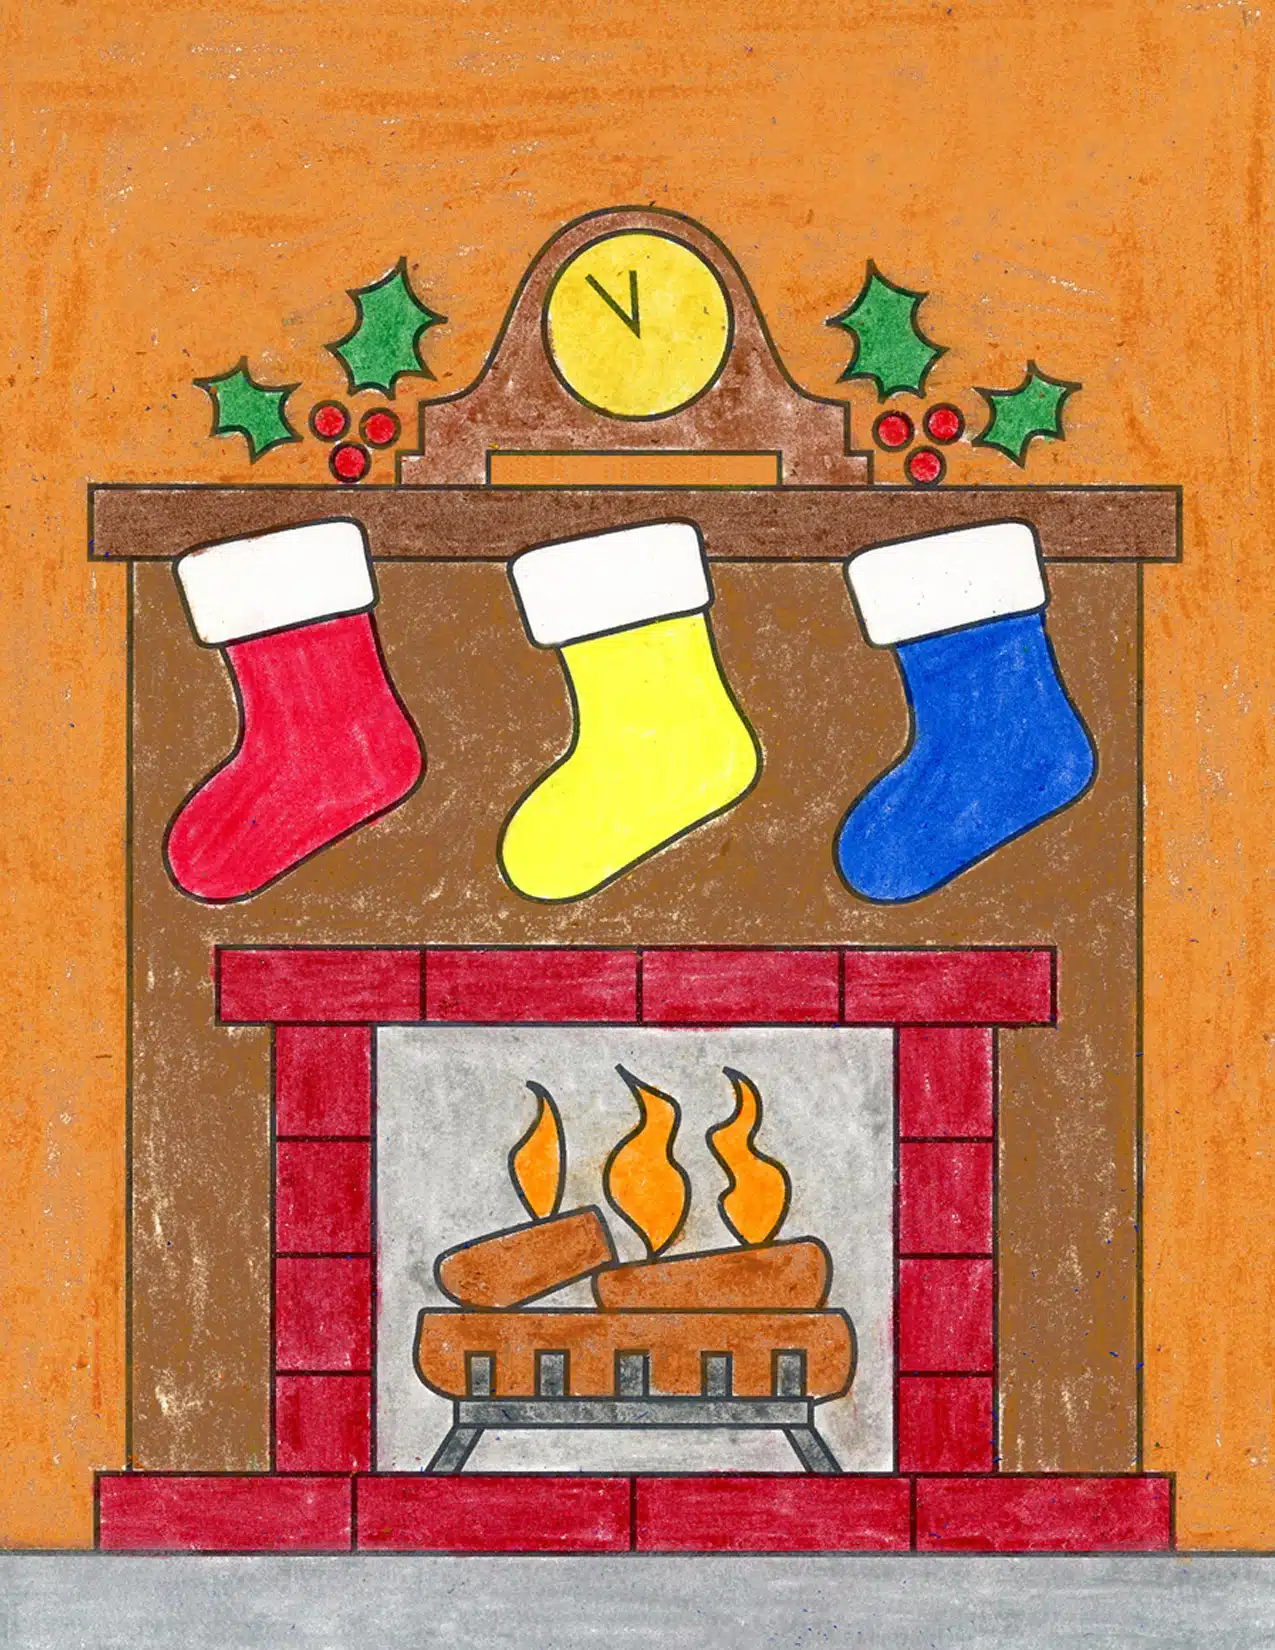 Easy How to Draw a Fireplace Tutorial and Fireplace Coloring Page